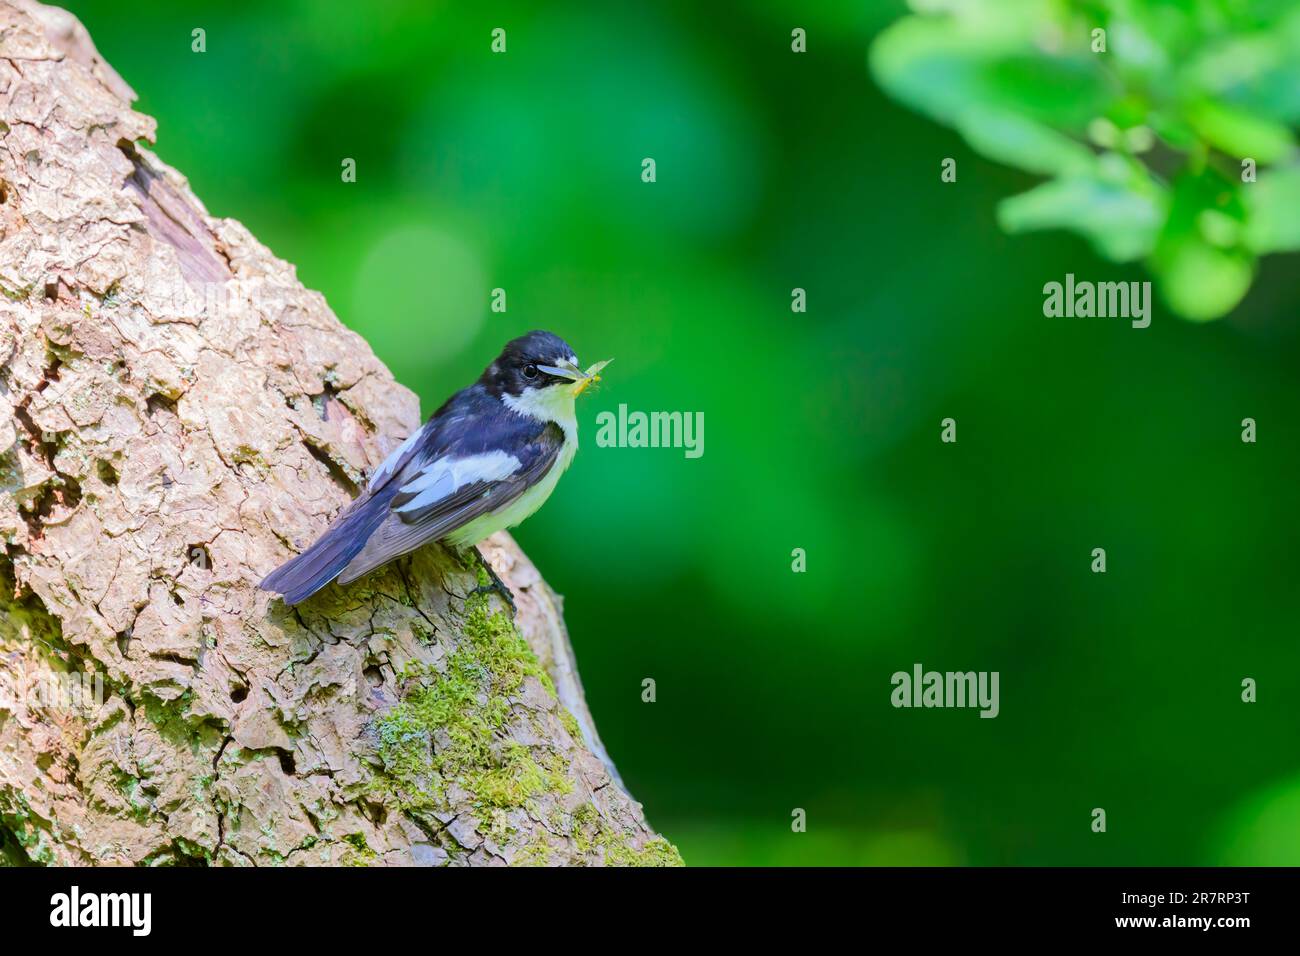 Male Pied Flycatcher, Ficedula hypoleuca, perched on a tree trunk with food. Stock Photo